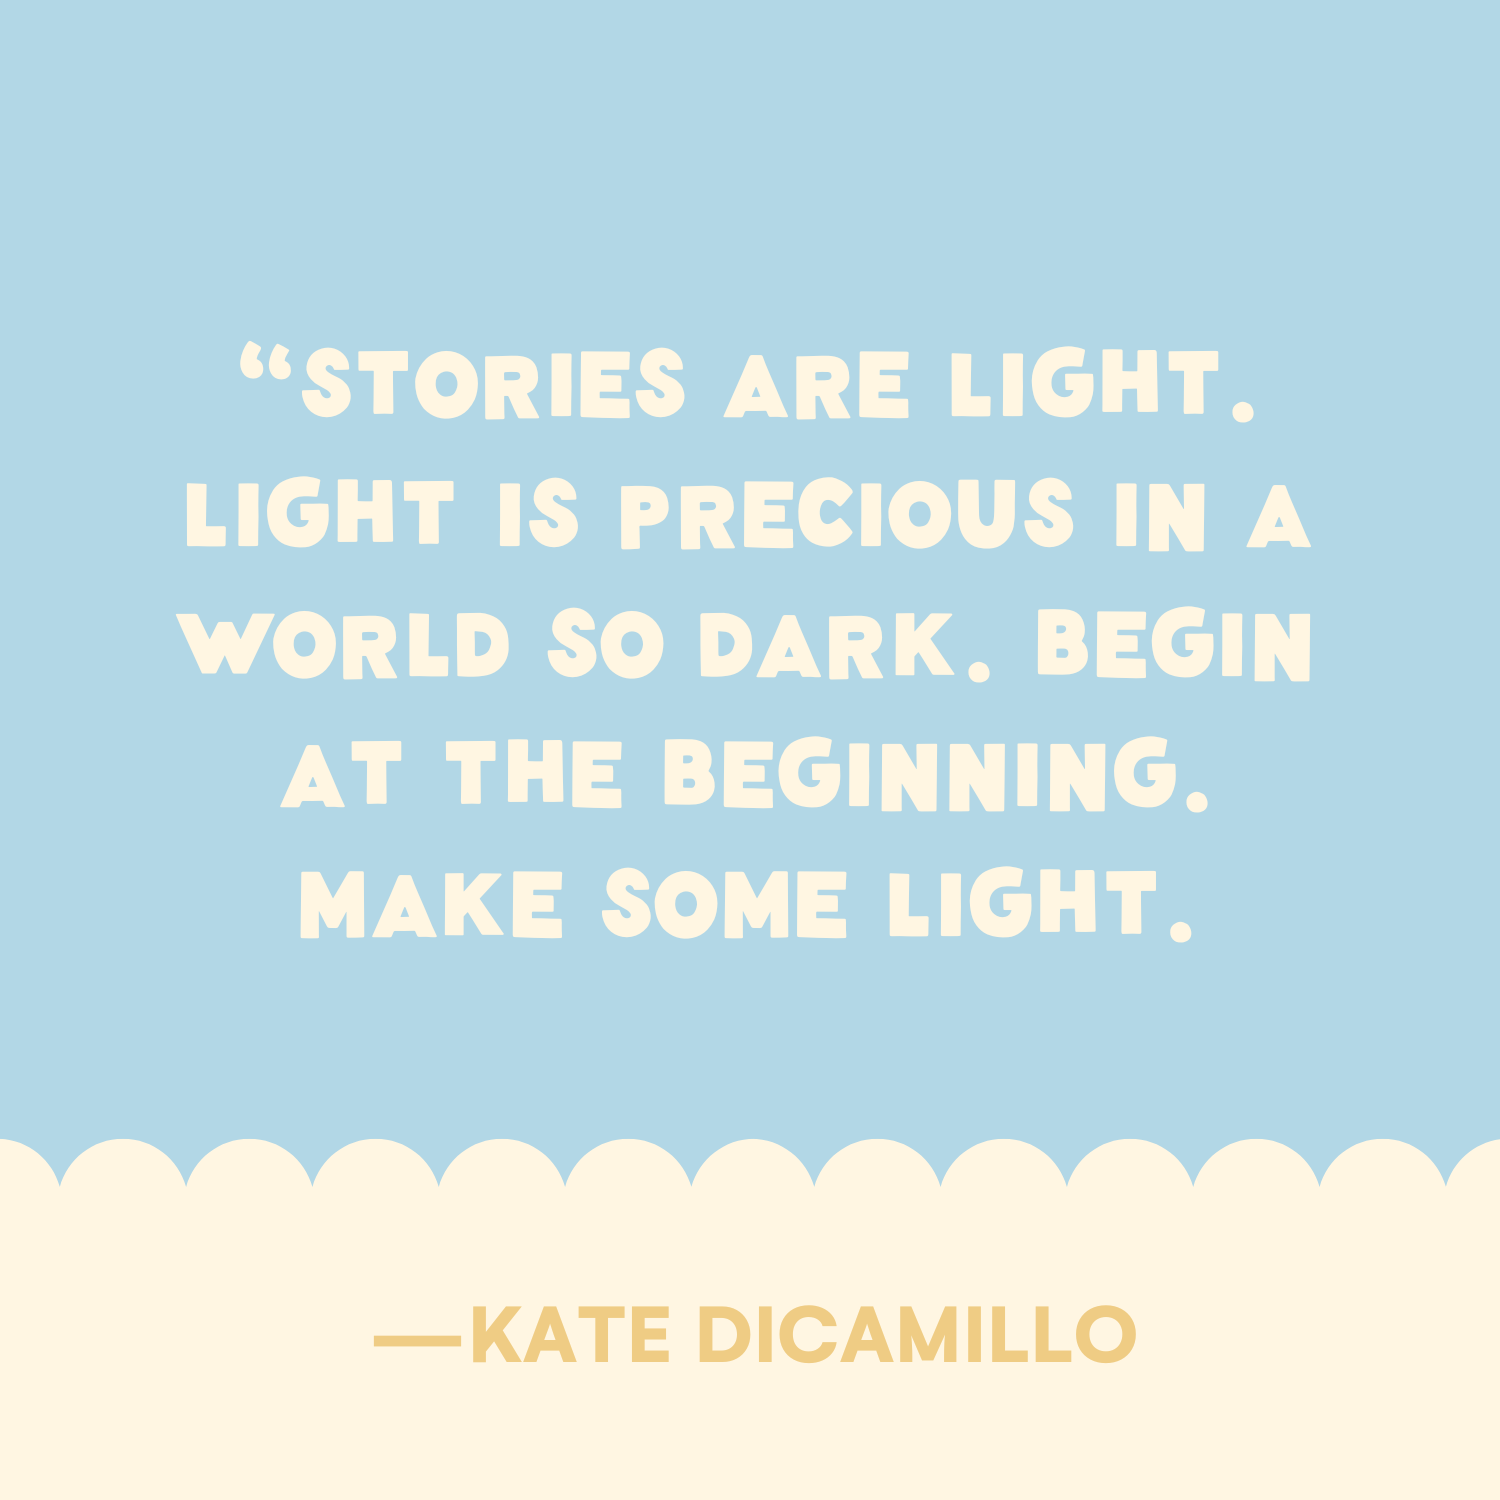 <p>"Stories are light. Light is precious in a world so dark. Begin at the beginning. Make some light." —Kate DiCamillo </p>